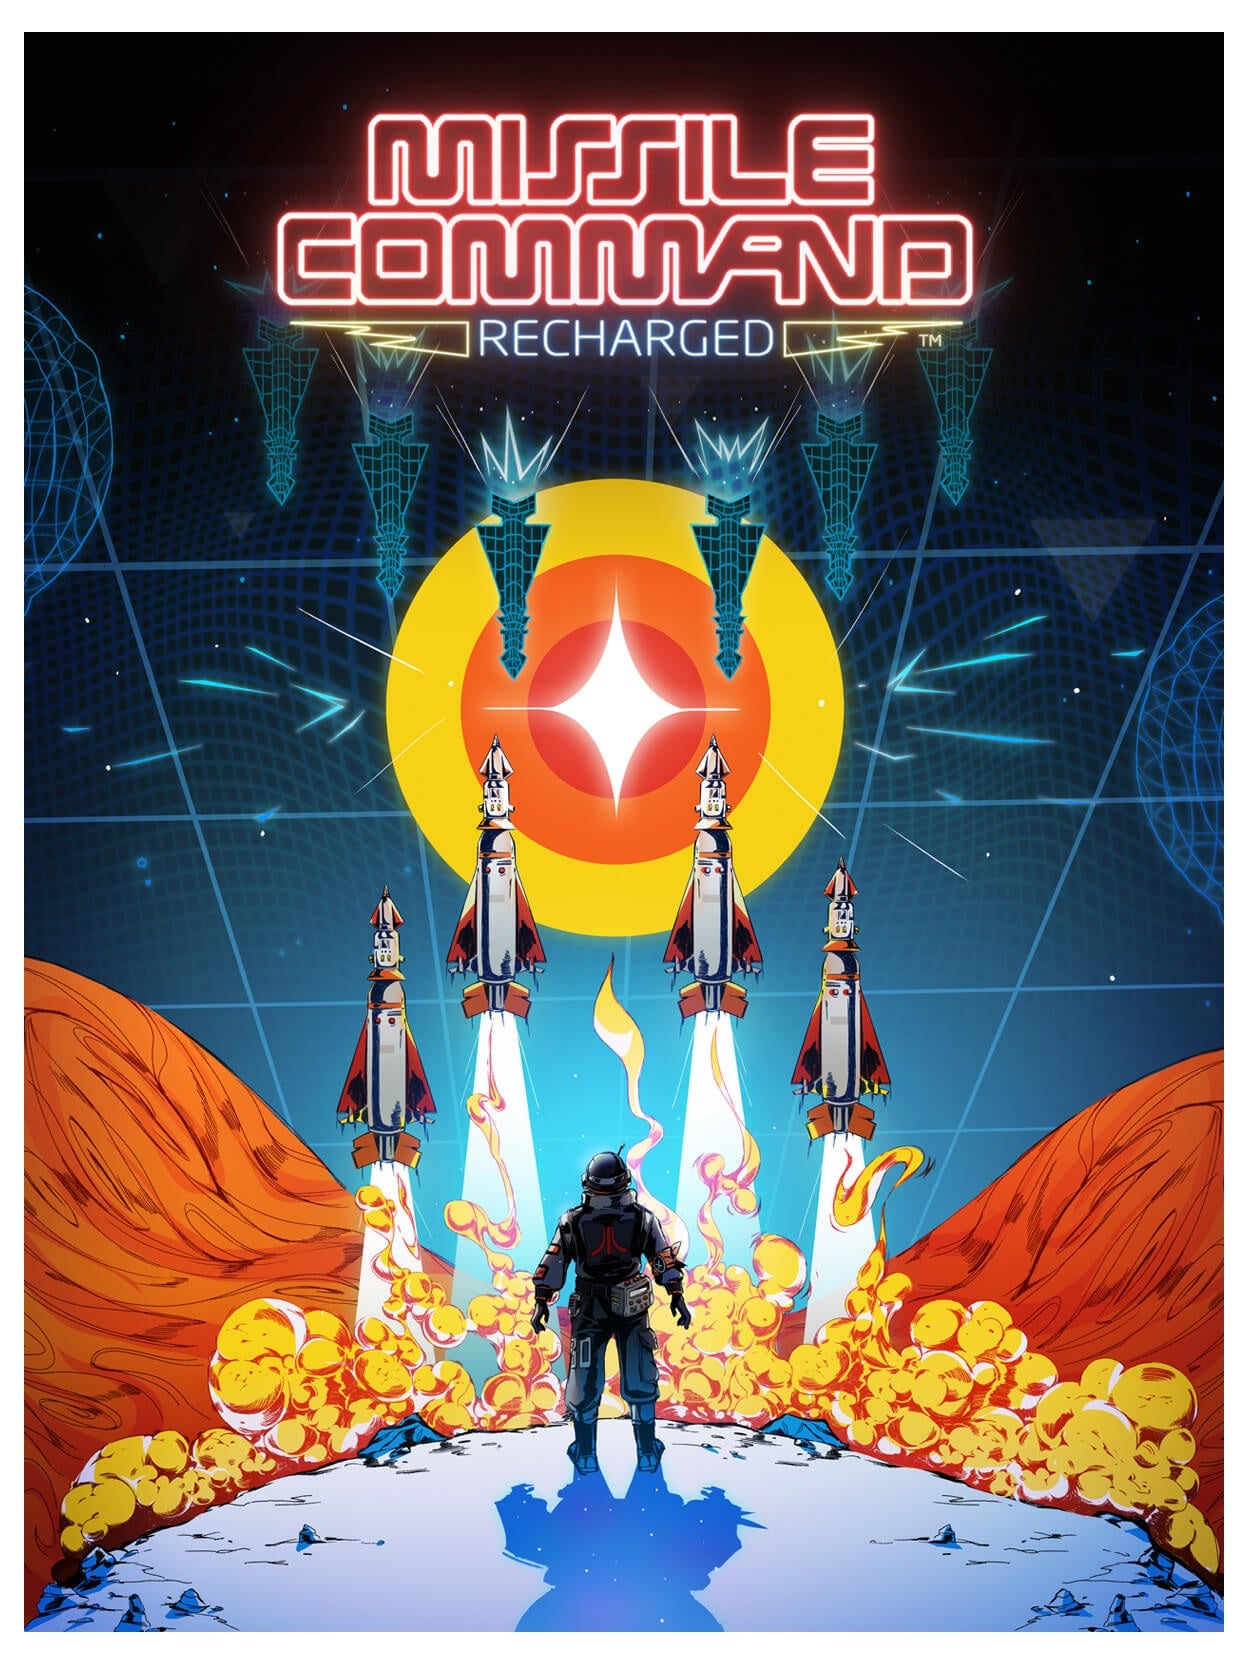 Atari Missile Command Recharged PC Game